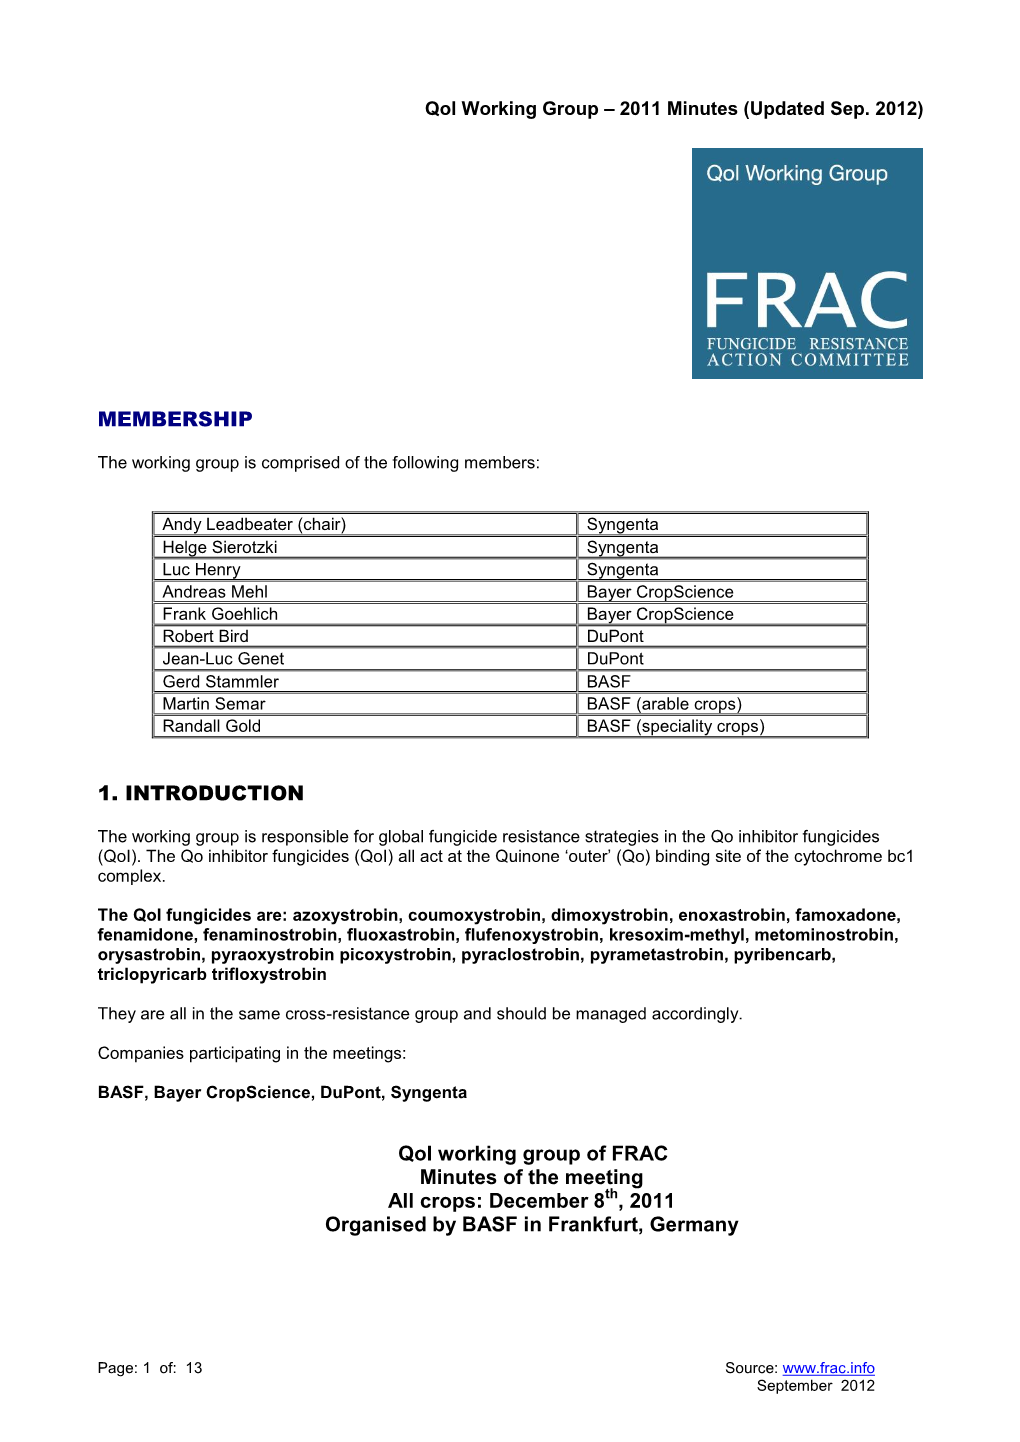 Minutes of the 2008 FRAC Qoi Working Group